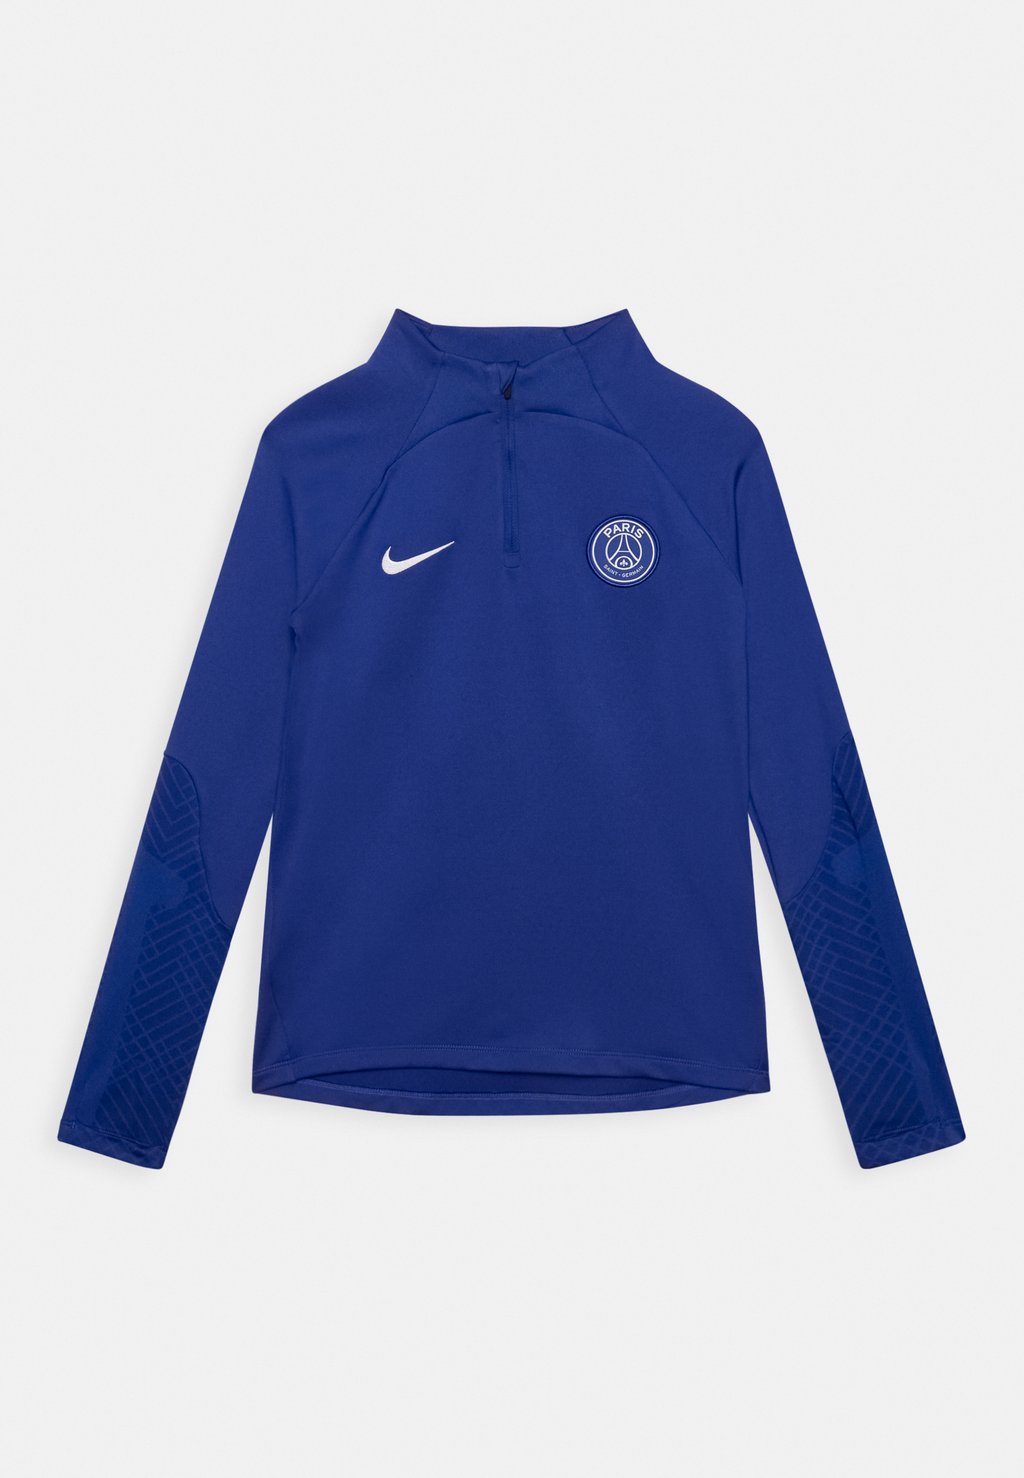 Футболка Psg Ynk Dfstrk Drill Top Kkscl Nike, цвет old royal/old royal/old royal/white old